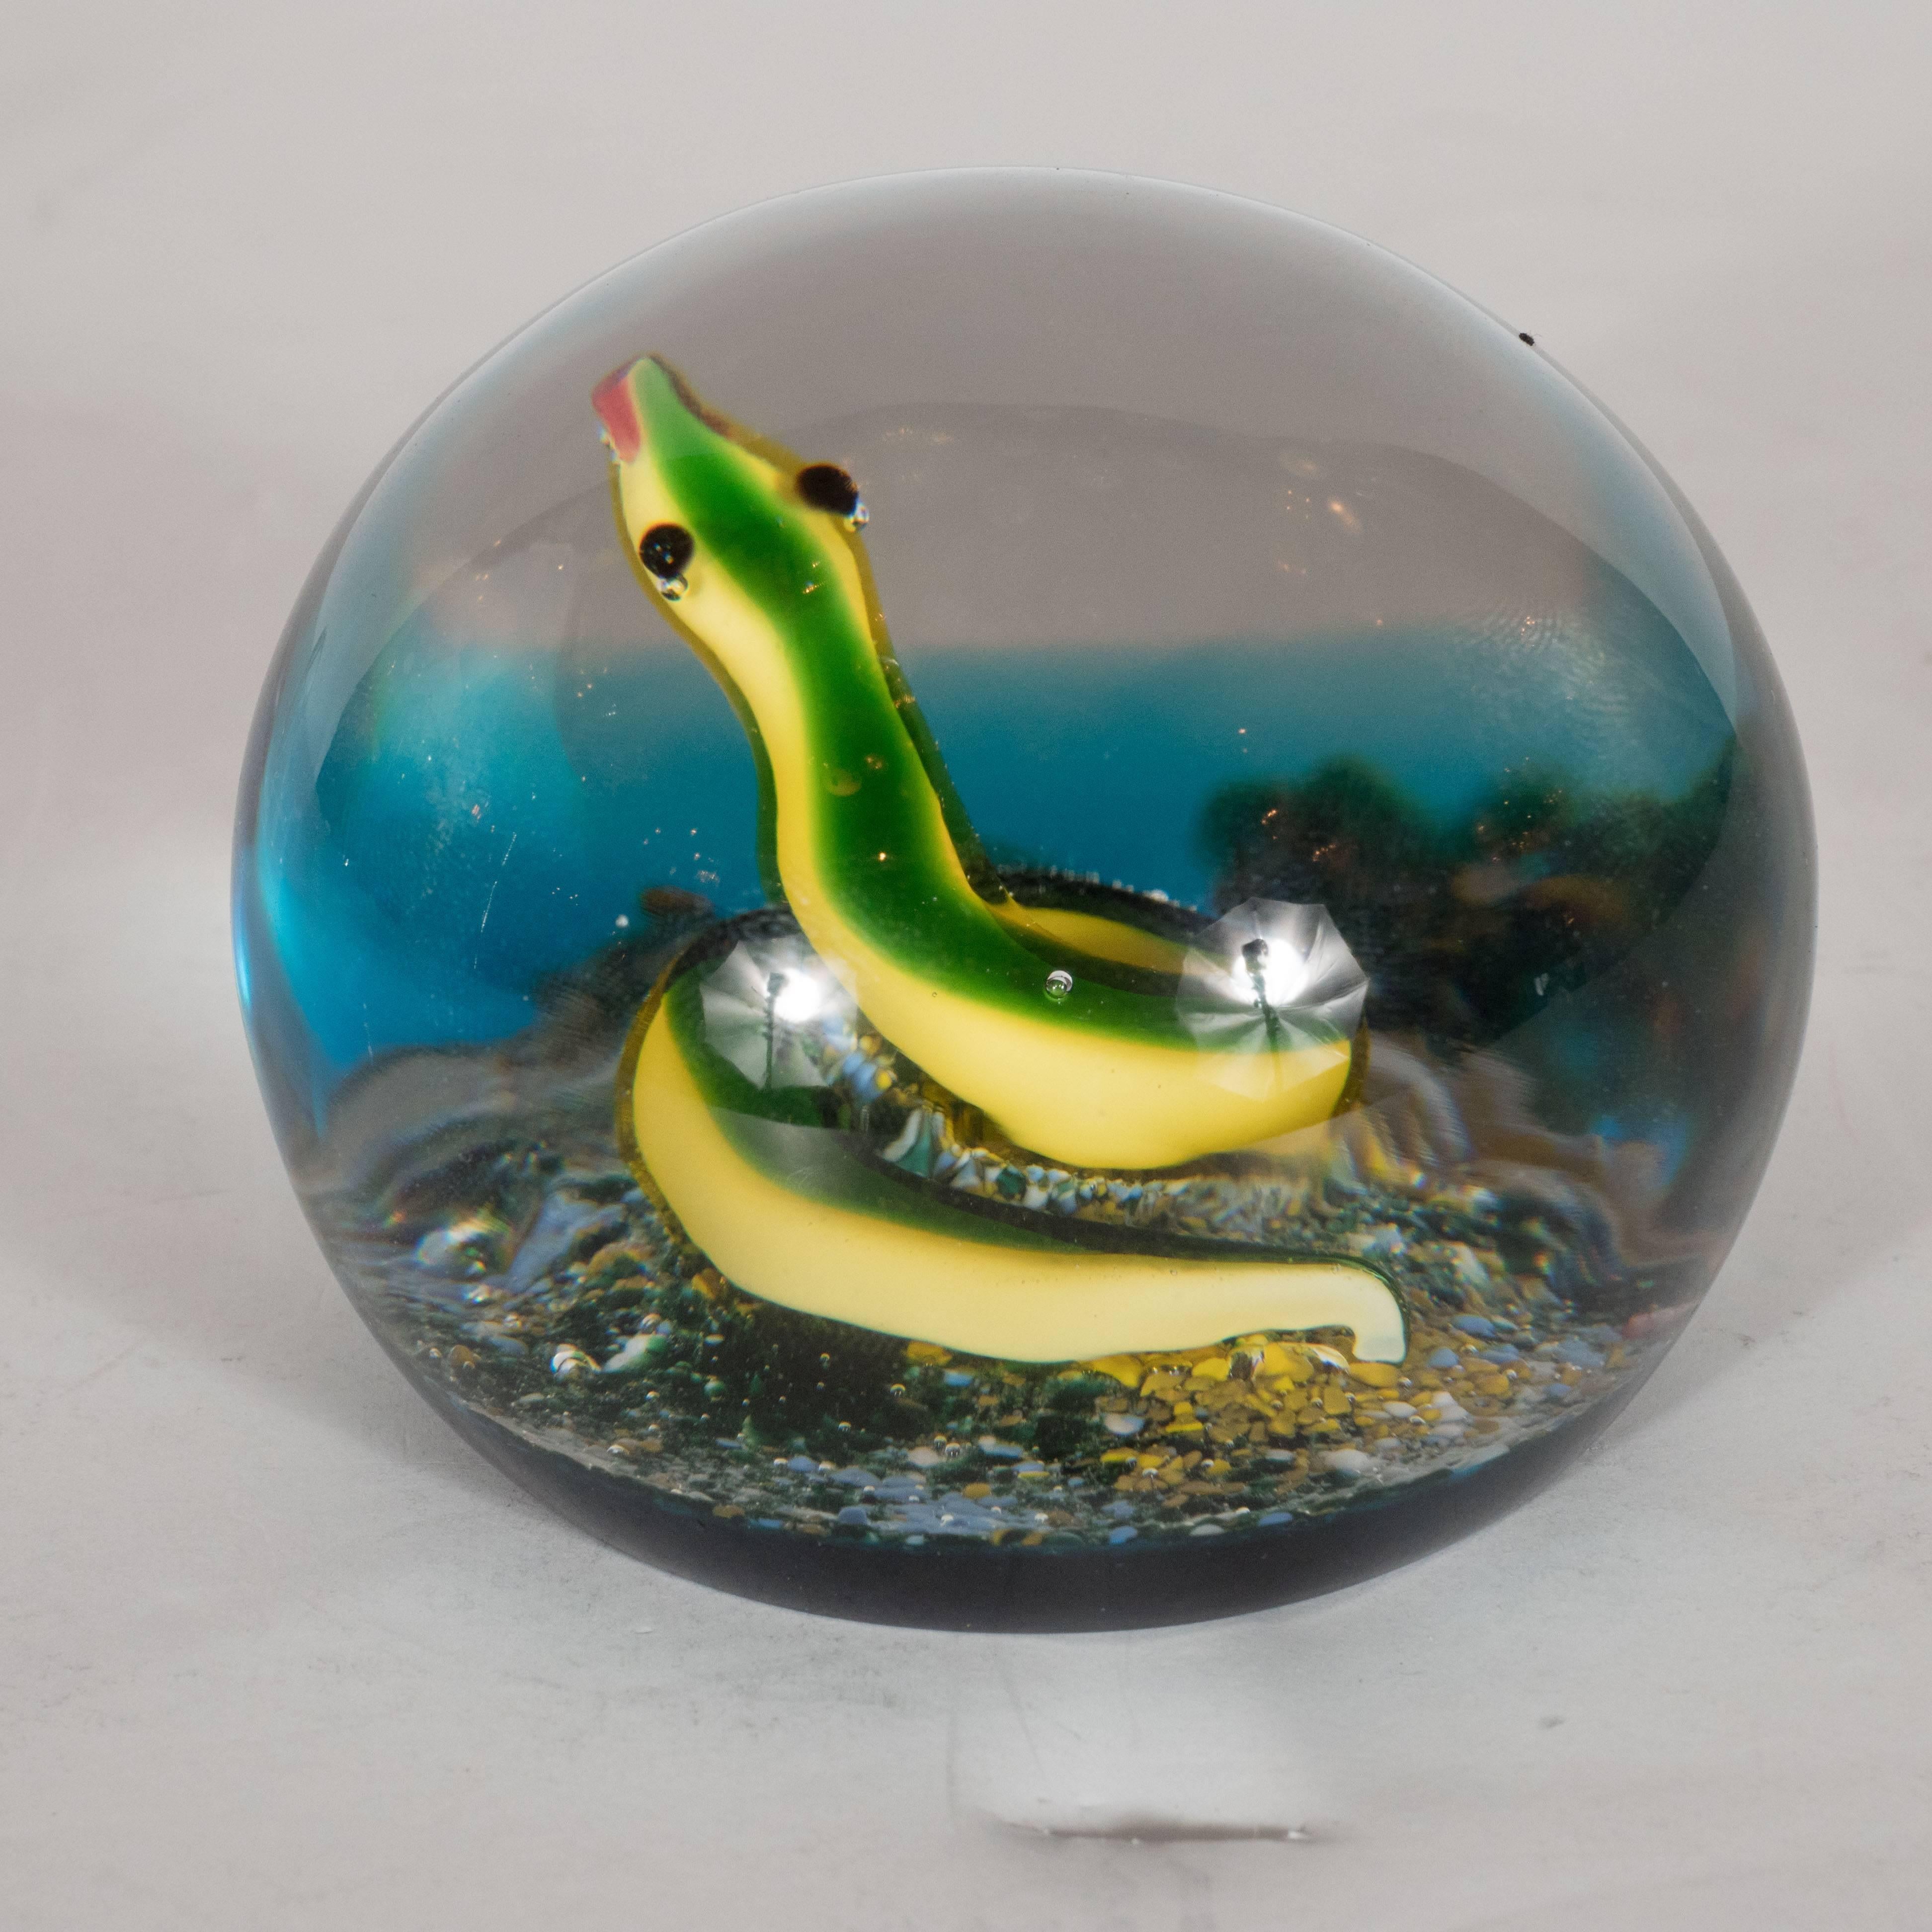 This rare and sought after limited edition Mid-Century Modernist Baccarat art glass paperweight was produced by the illustrious French glass maker, circa 1971. Handblown in hues of emerald, robin's egg blue, aquamarine, and canary yellow, this is